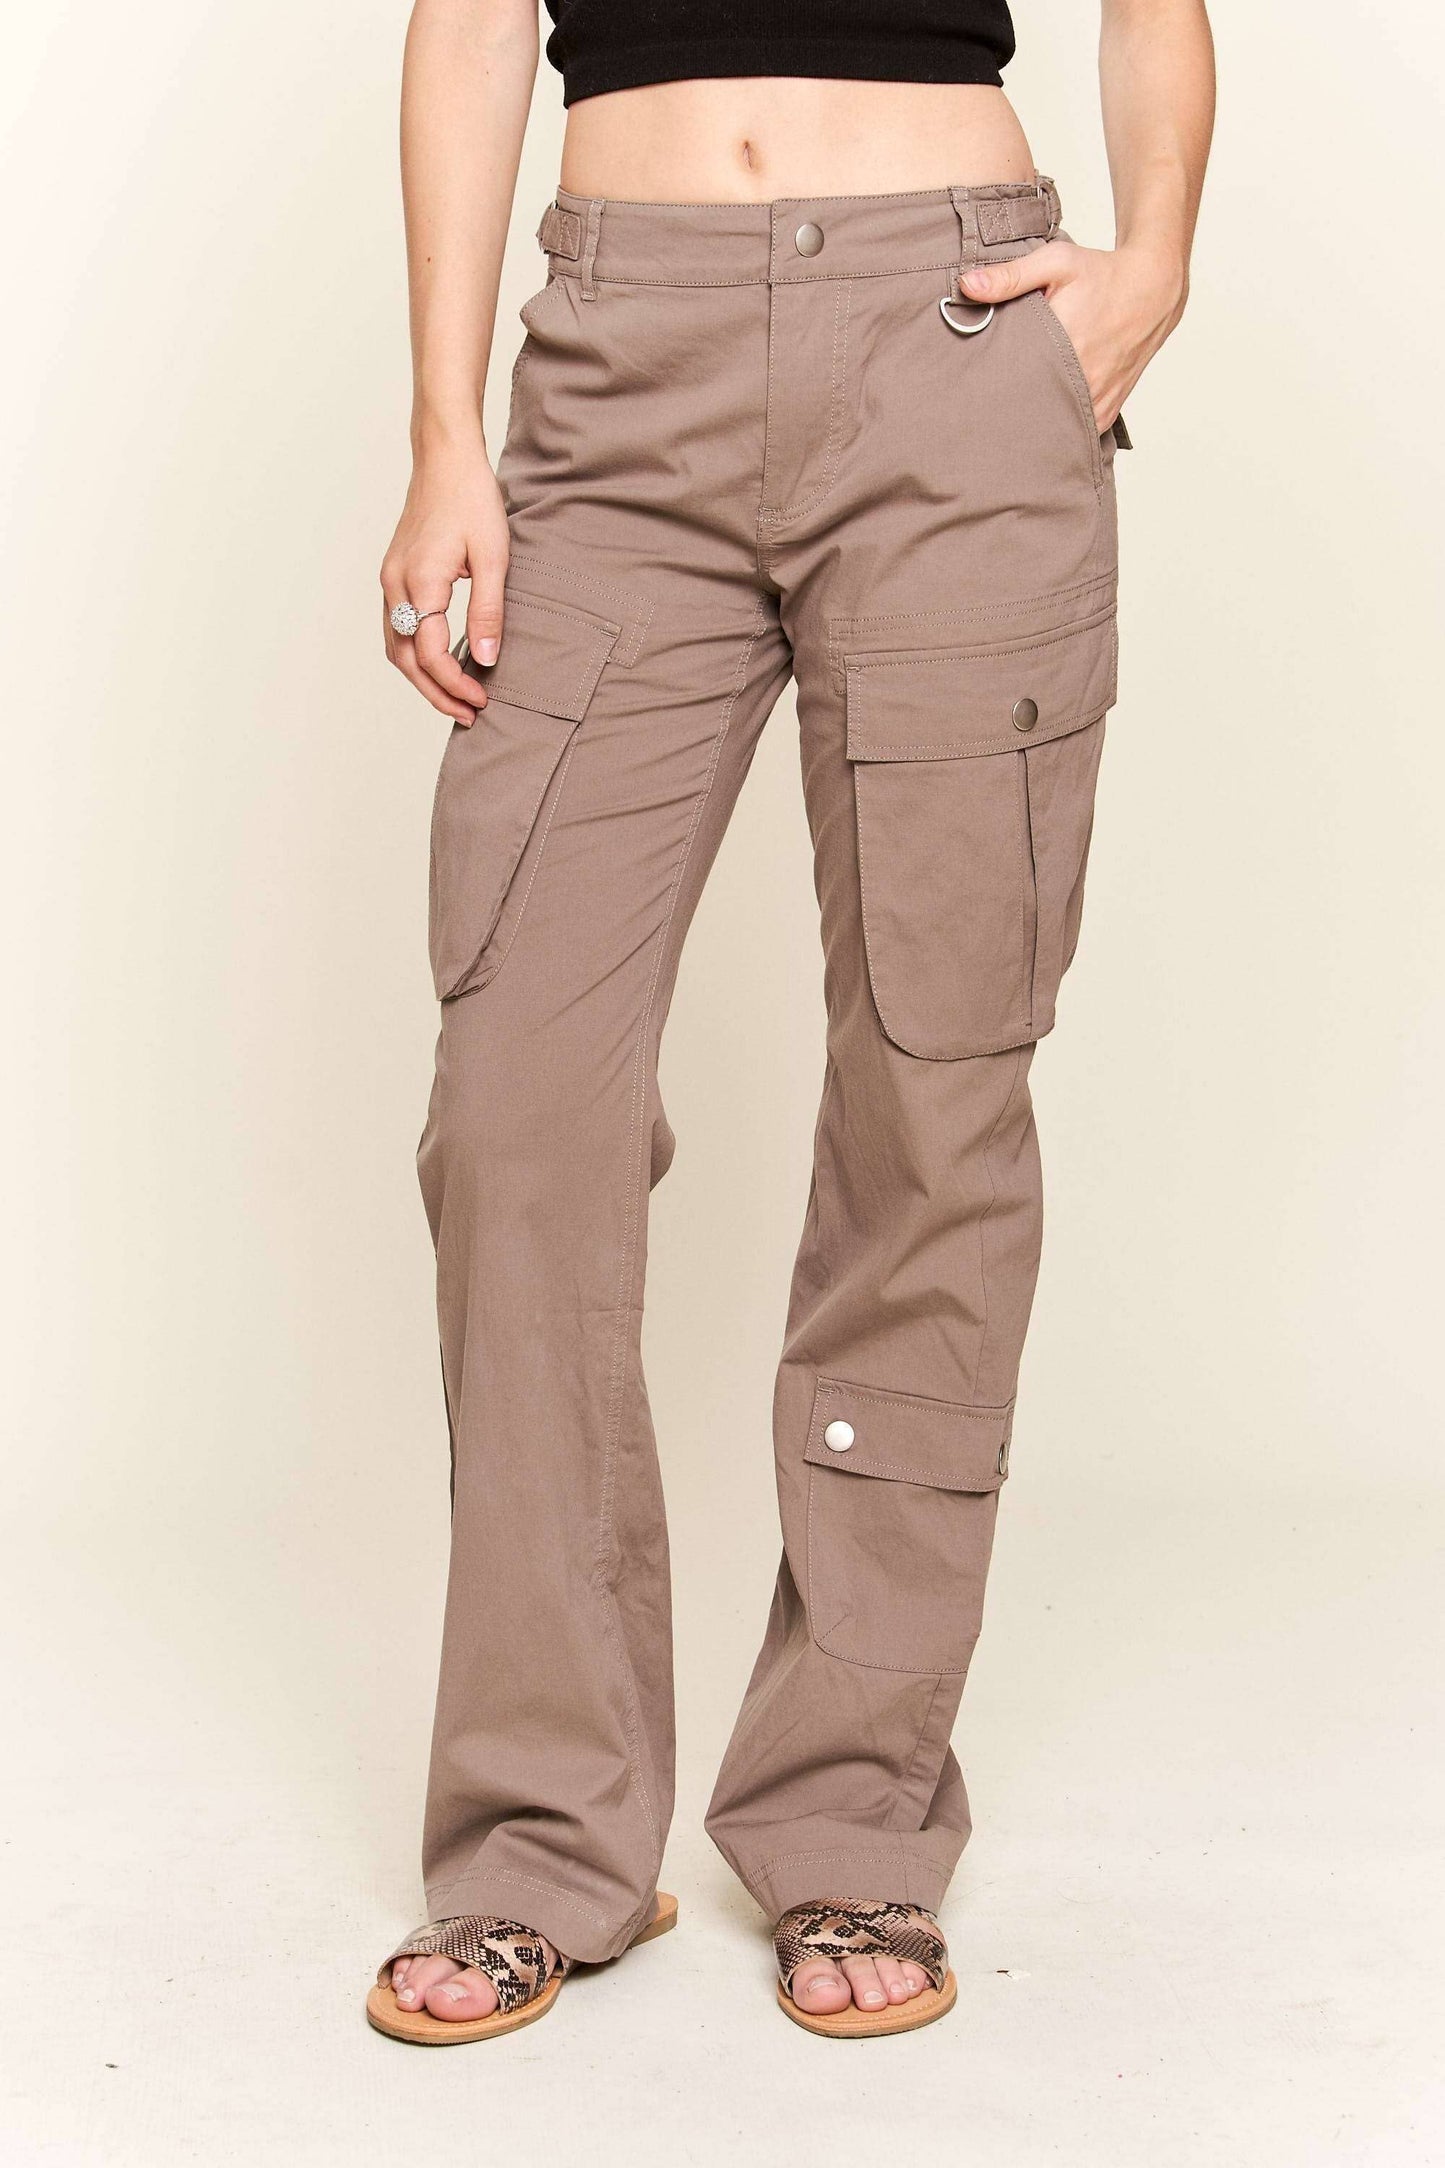 Madelyn - LEP3206 - LOW RISE STRAIGHT CARGO PANTS